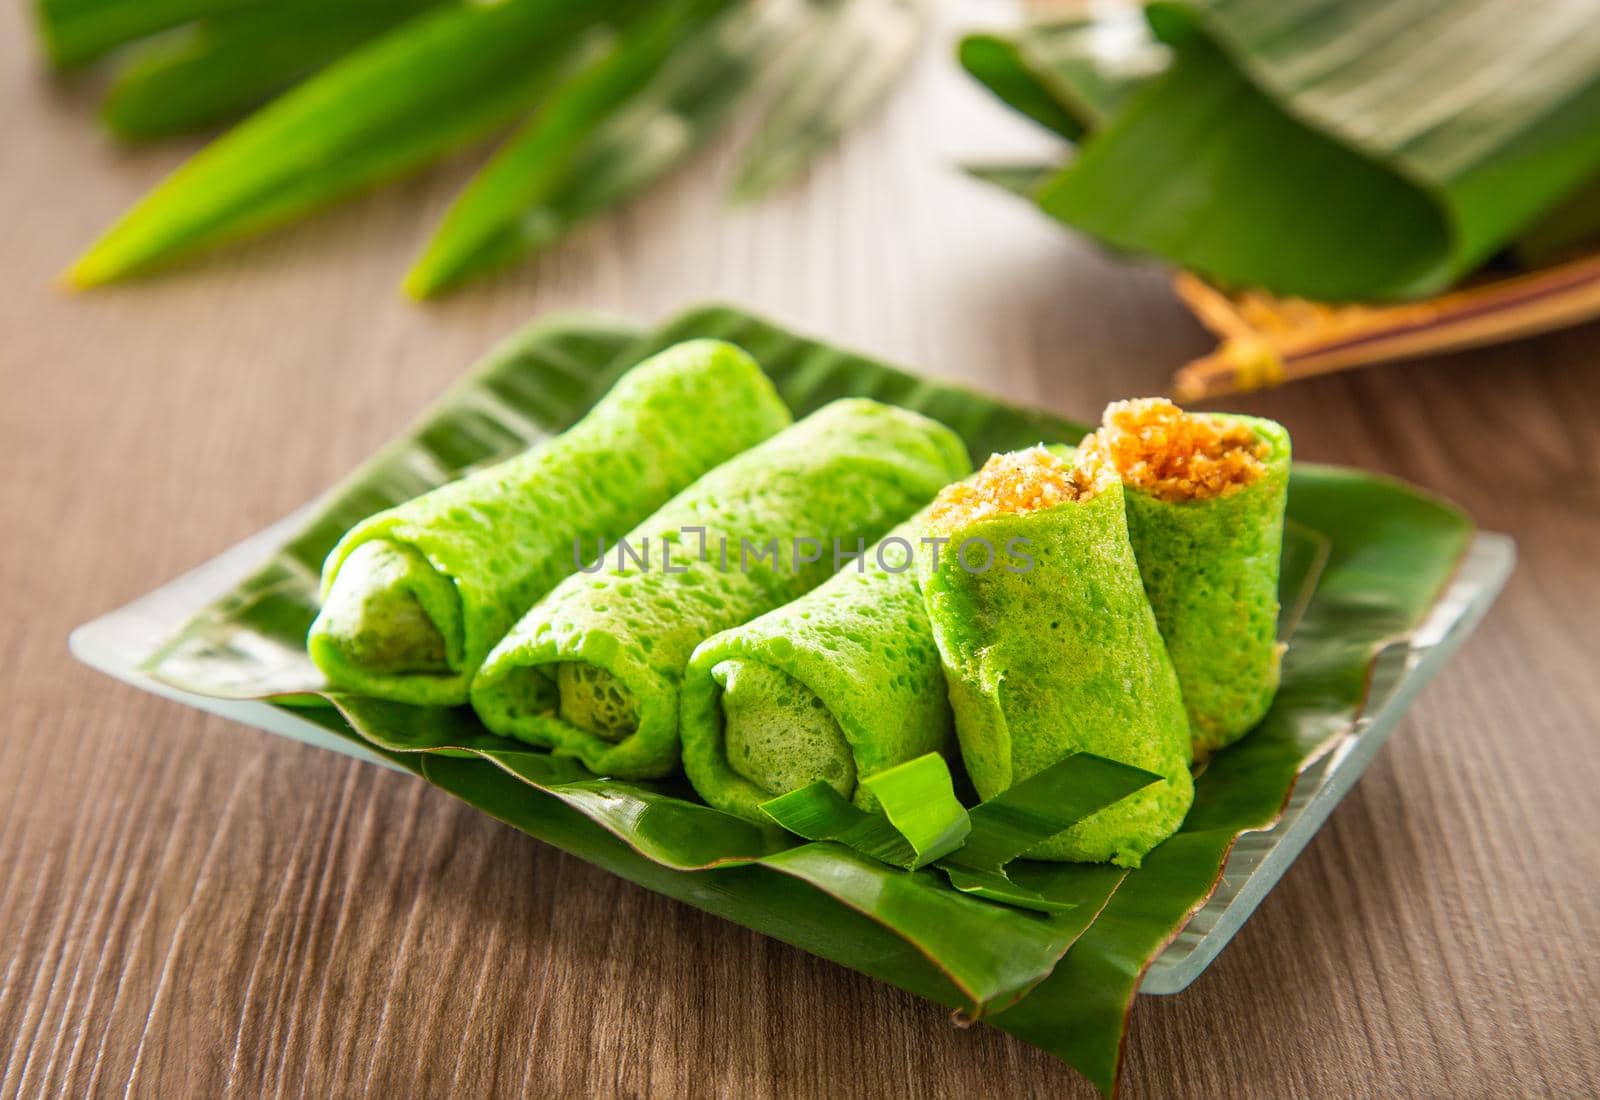 Malaysia popular sweet dessert with coconut known as kuih ketayap by tehcheesiong